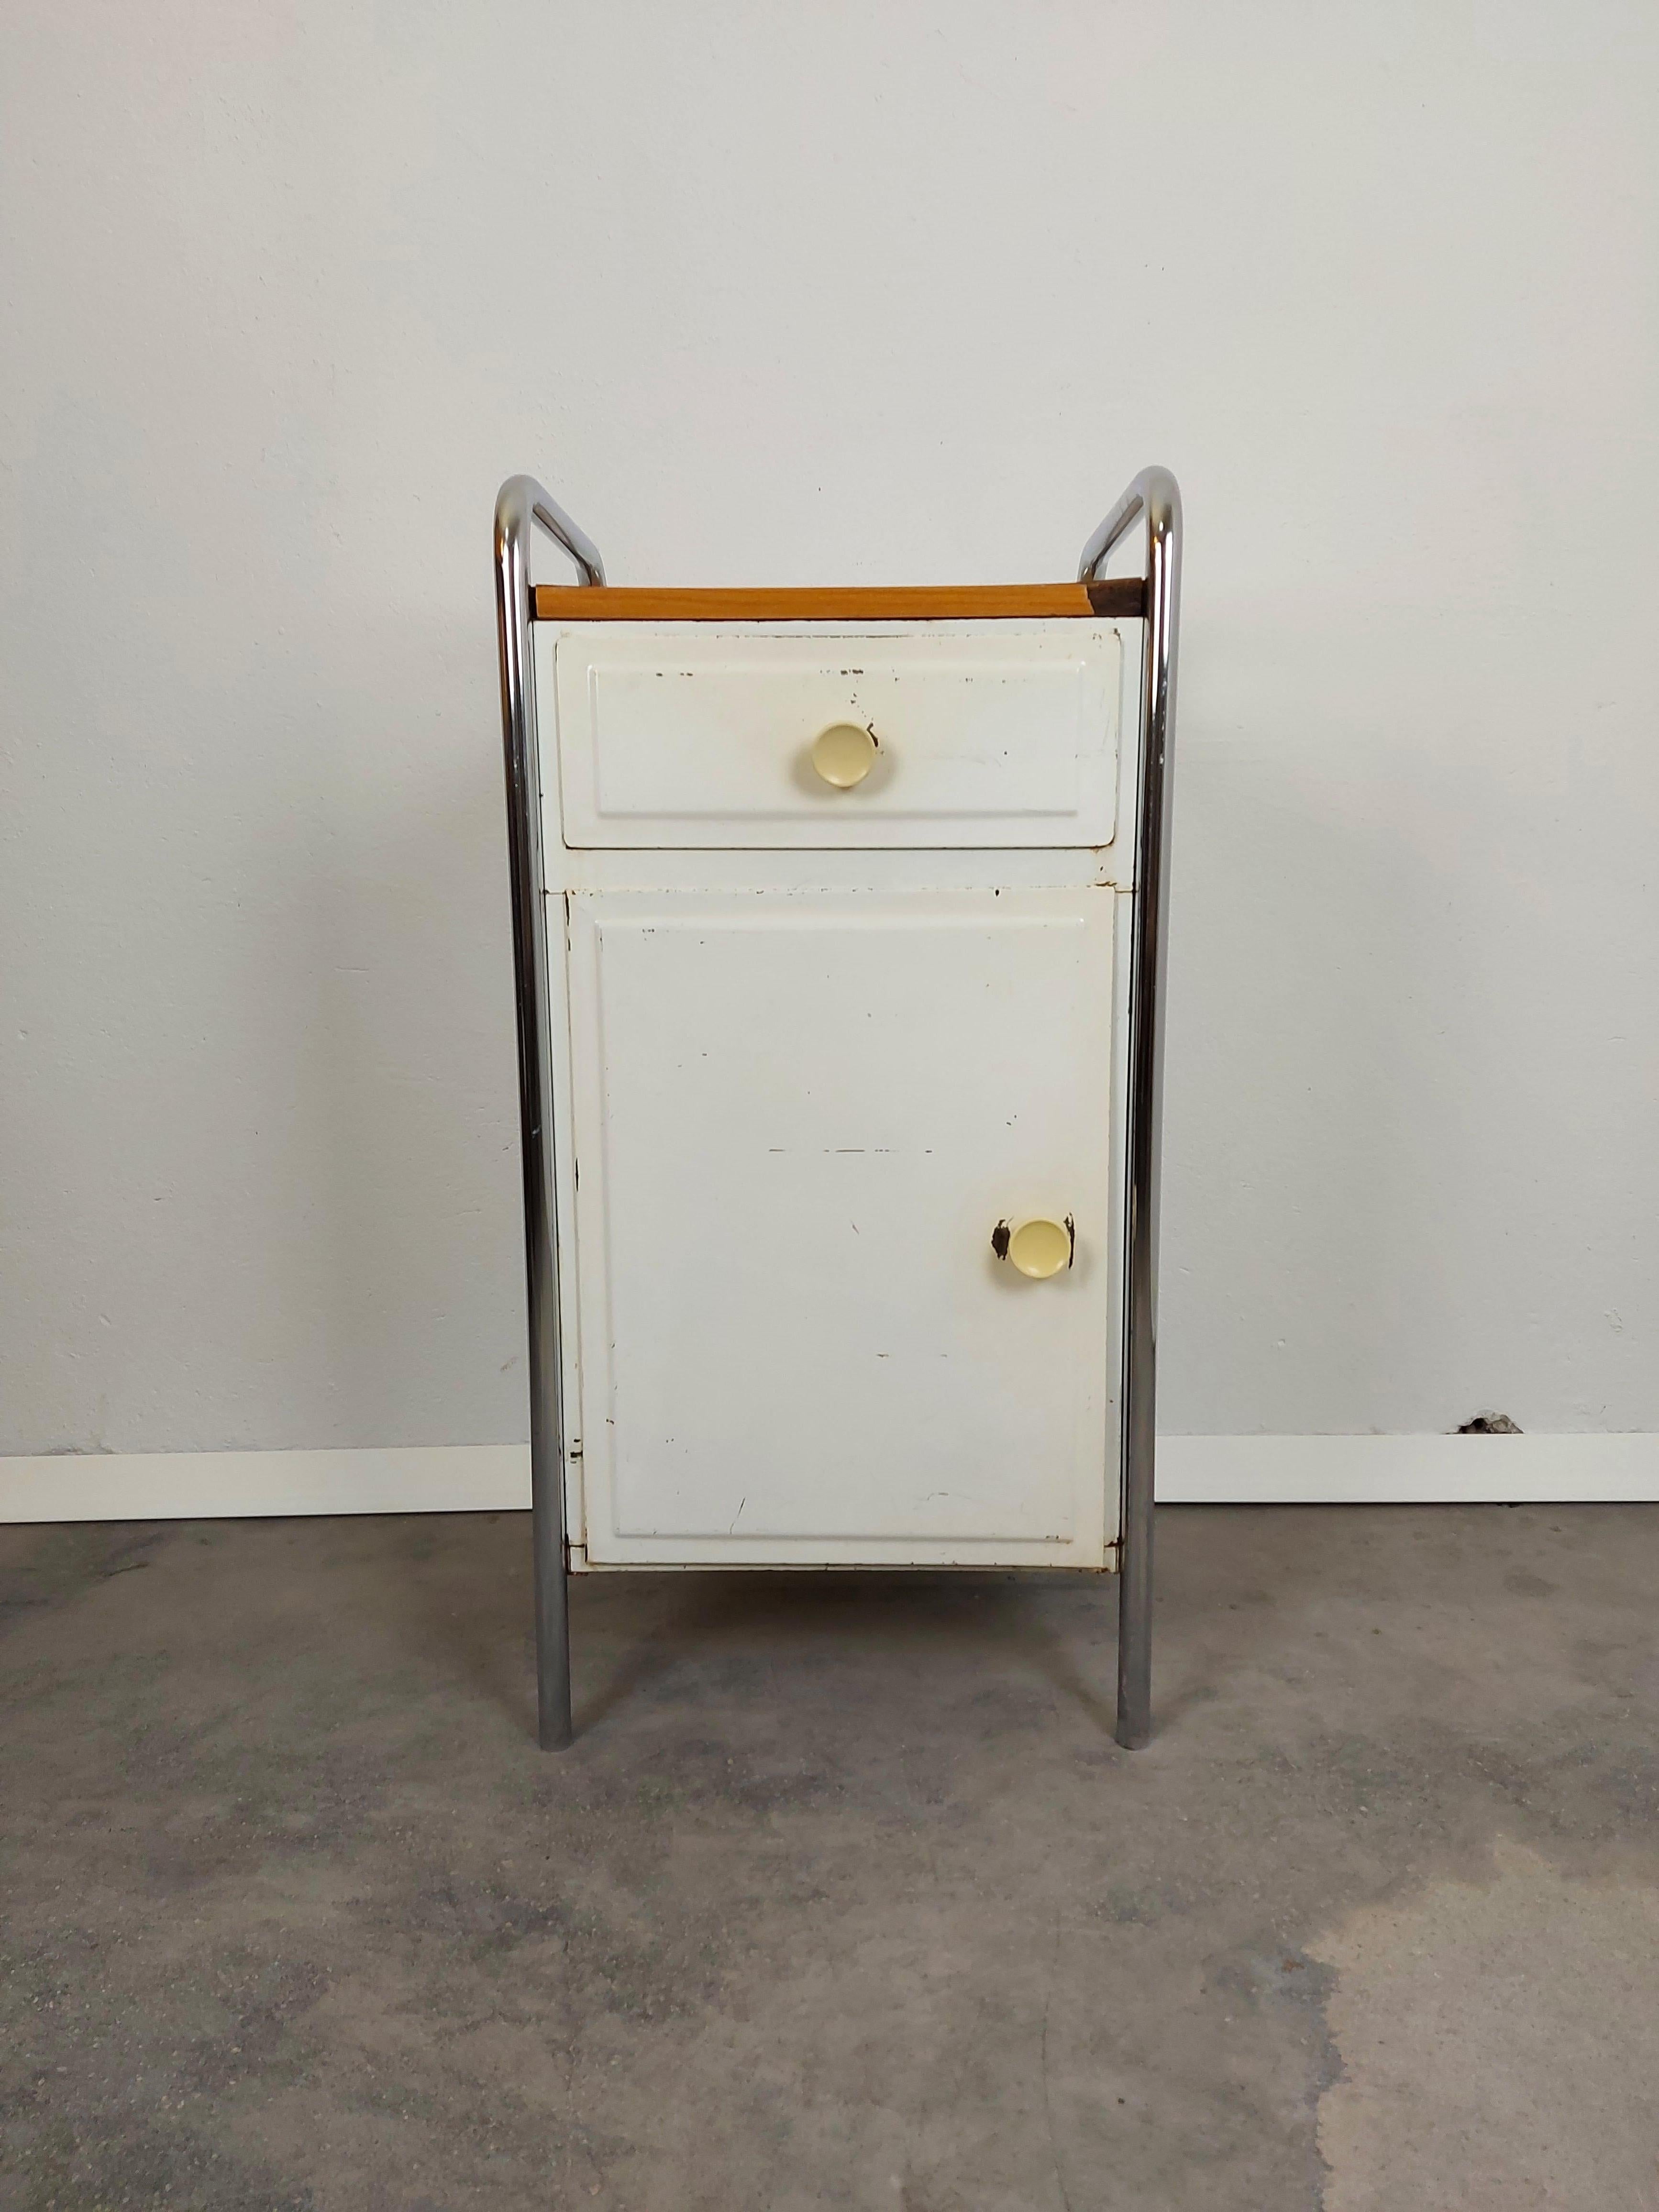 Vintage cabinet with 1 drawer and additional storage space with one shelve.

Material: Metal, Chrome, Plywood

Period: 1970s

Detailed condition: good original vintage condition, few traces of use

Measures: H-78, W-42, D-35.